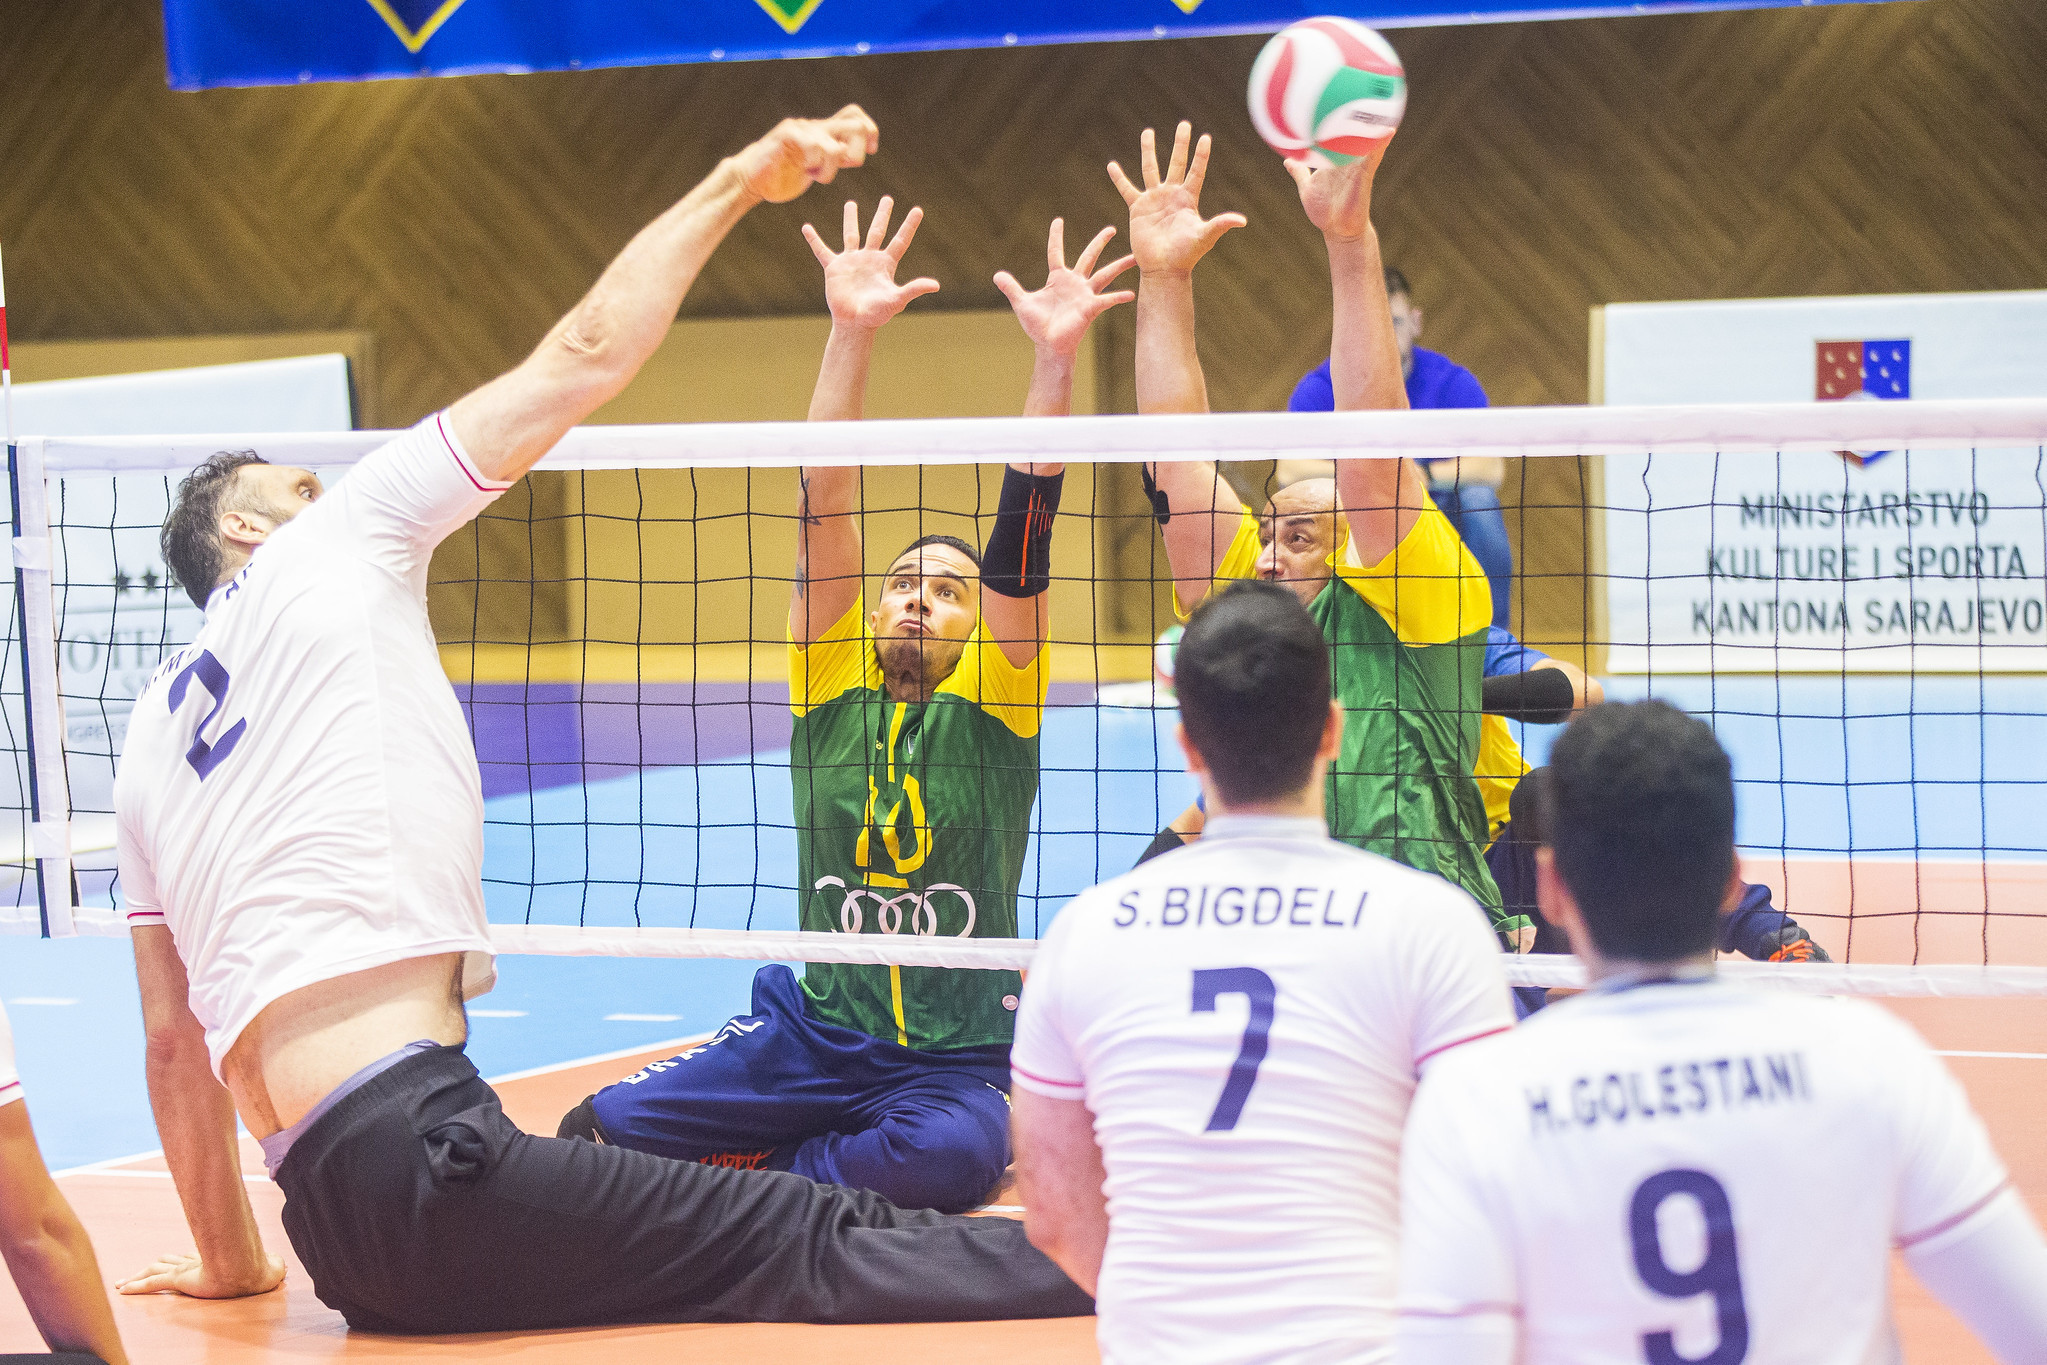 Iran, playing in white, defeated Brazil to reach the men's final at the Sitting Volleyball World Championship ©Flickr/World ParaVolley